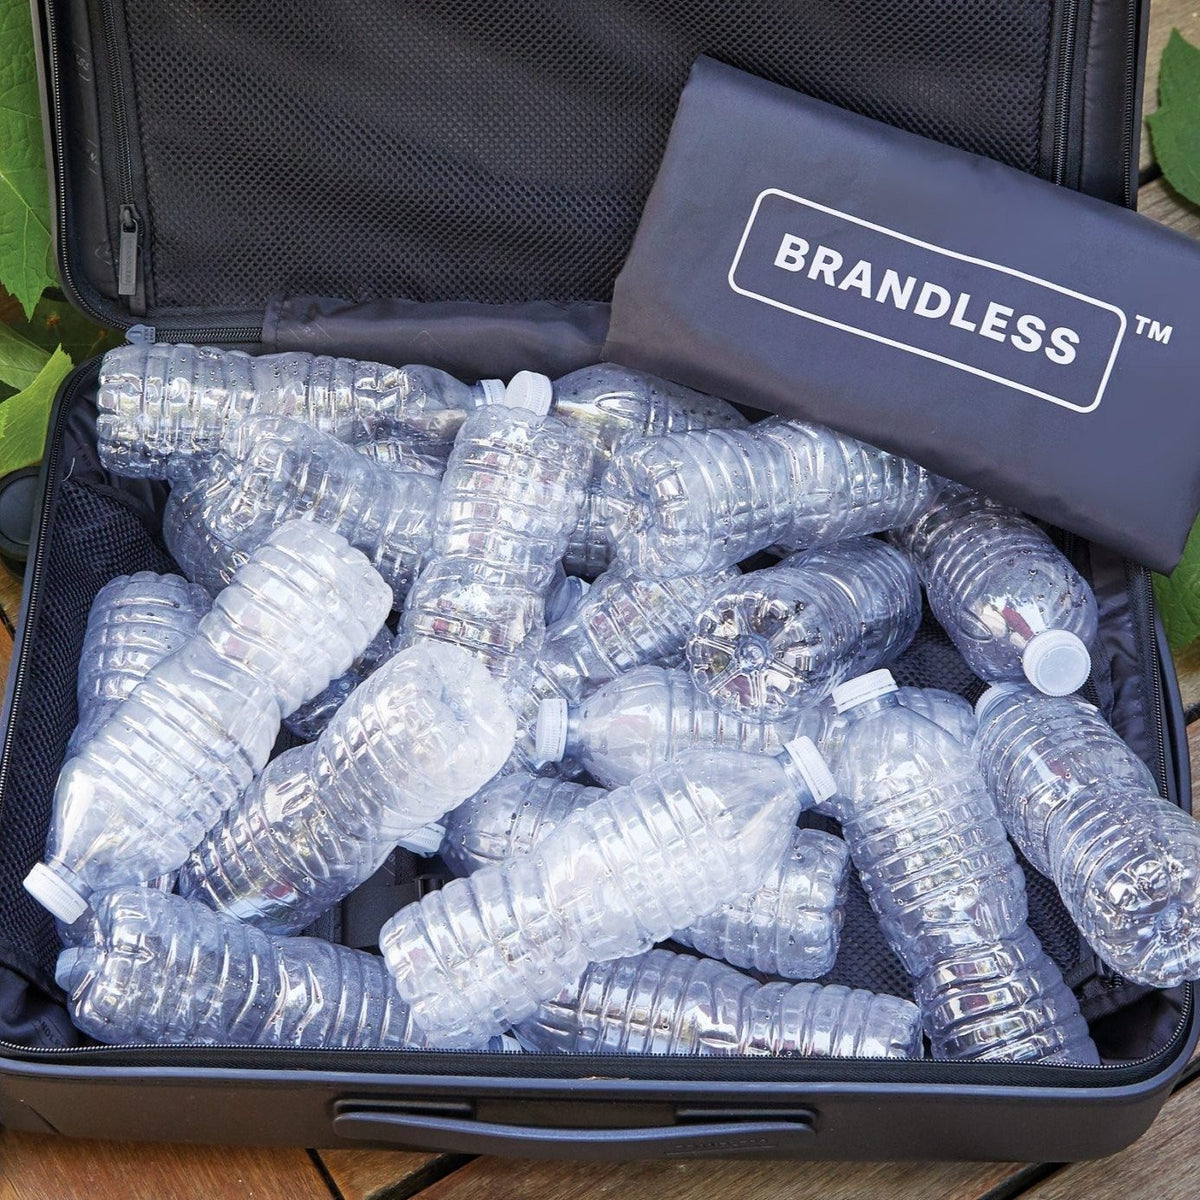 Checked luggage bag full of empty single-use bottled waters, demonstrating how many bottles the use of recycled materials in the luggage liner are kept out of landfills.